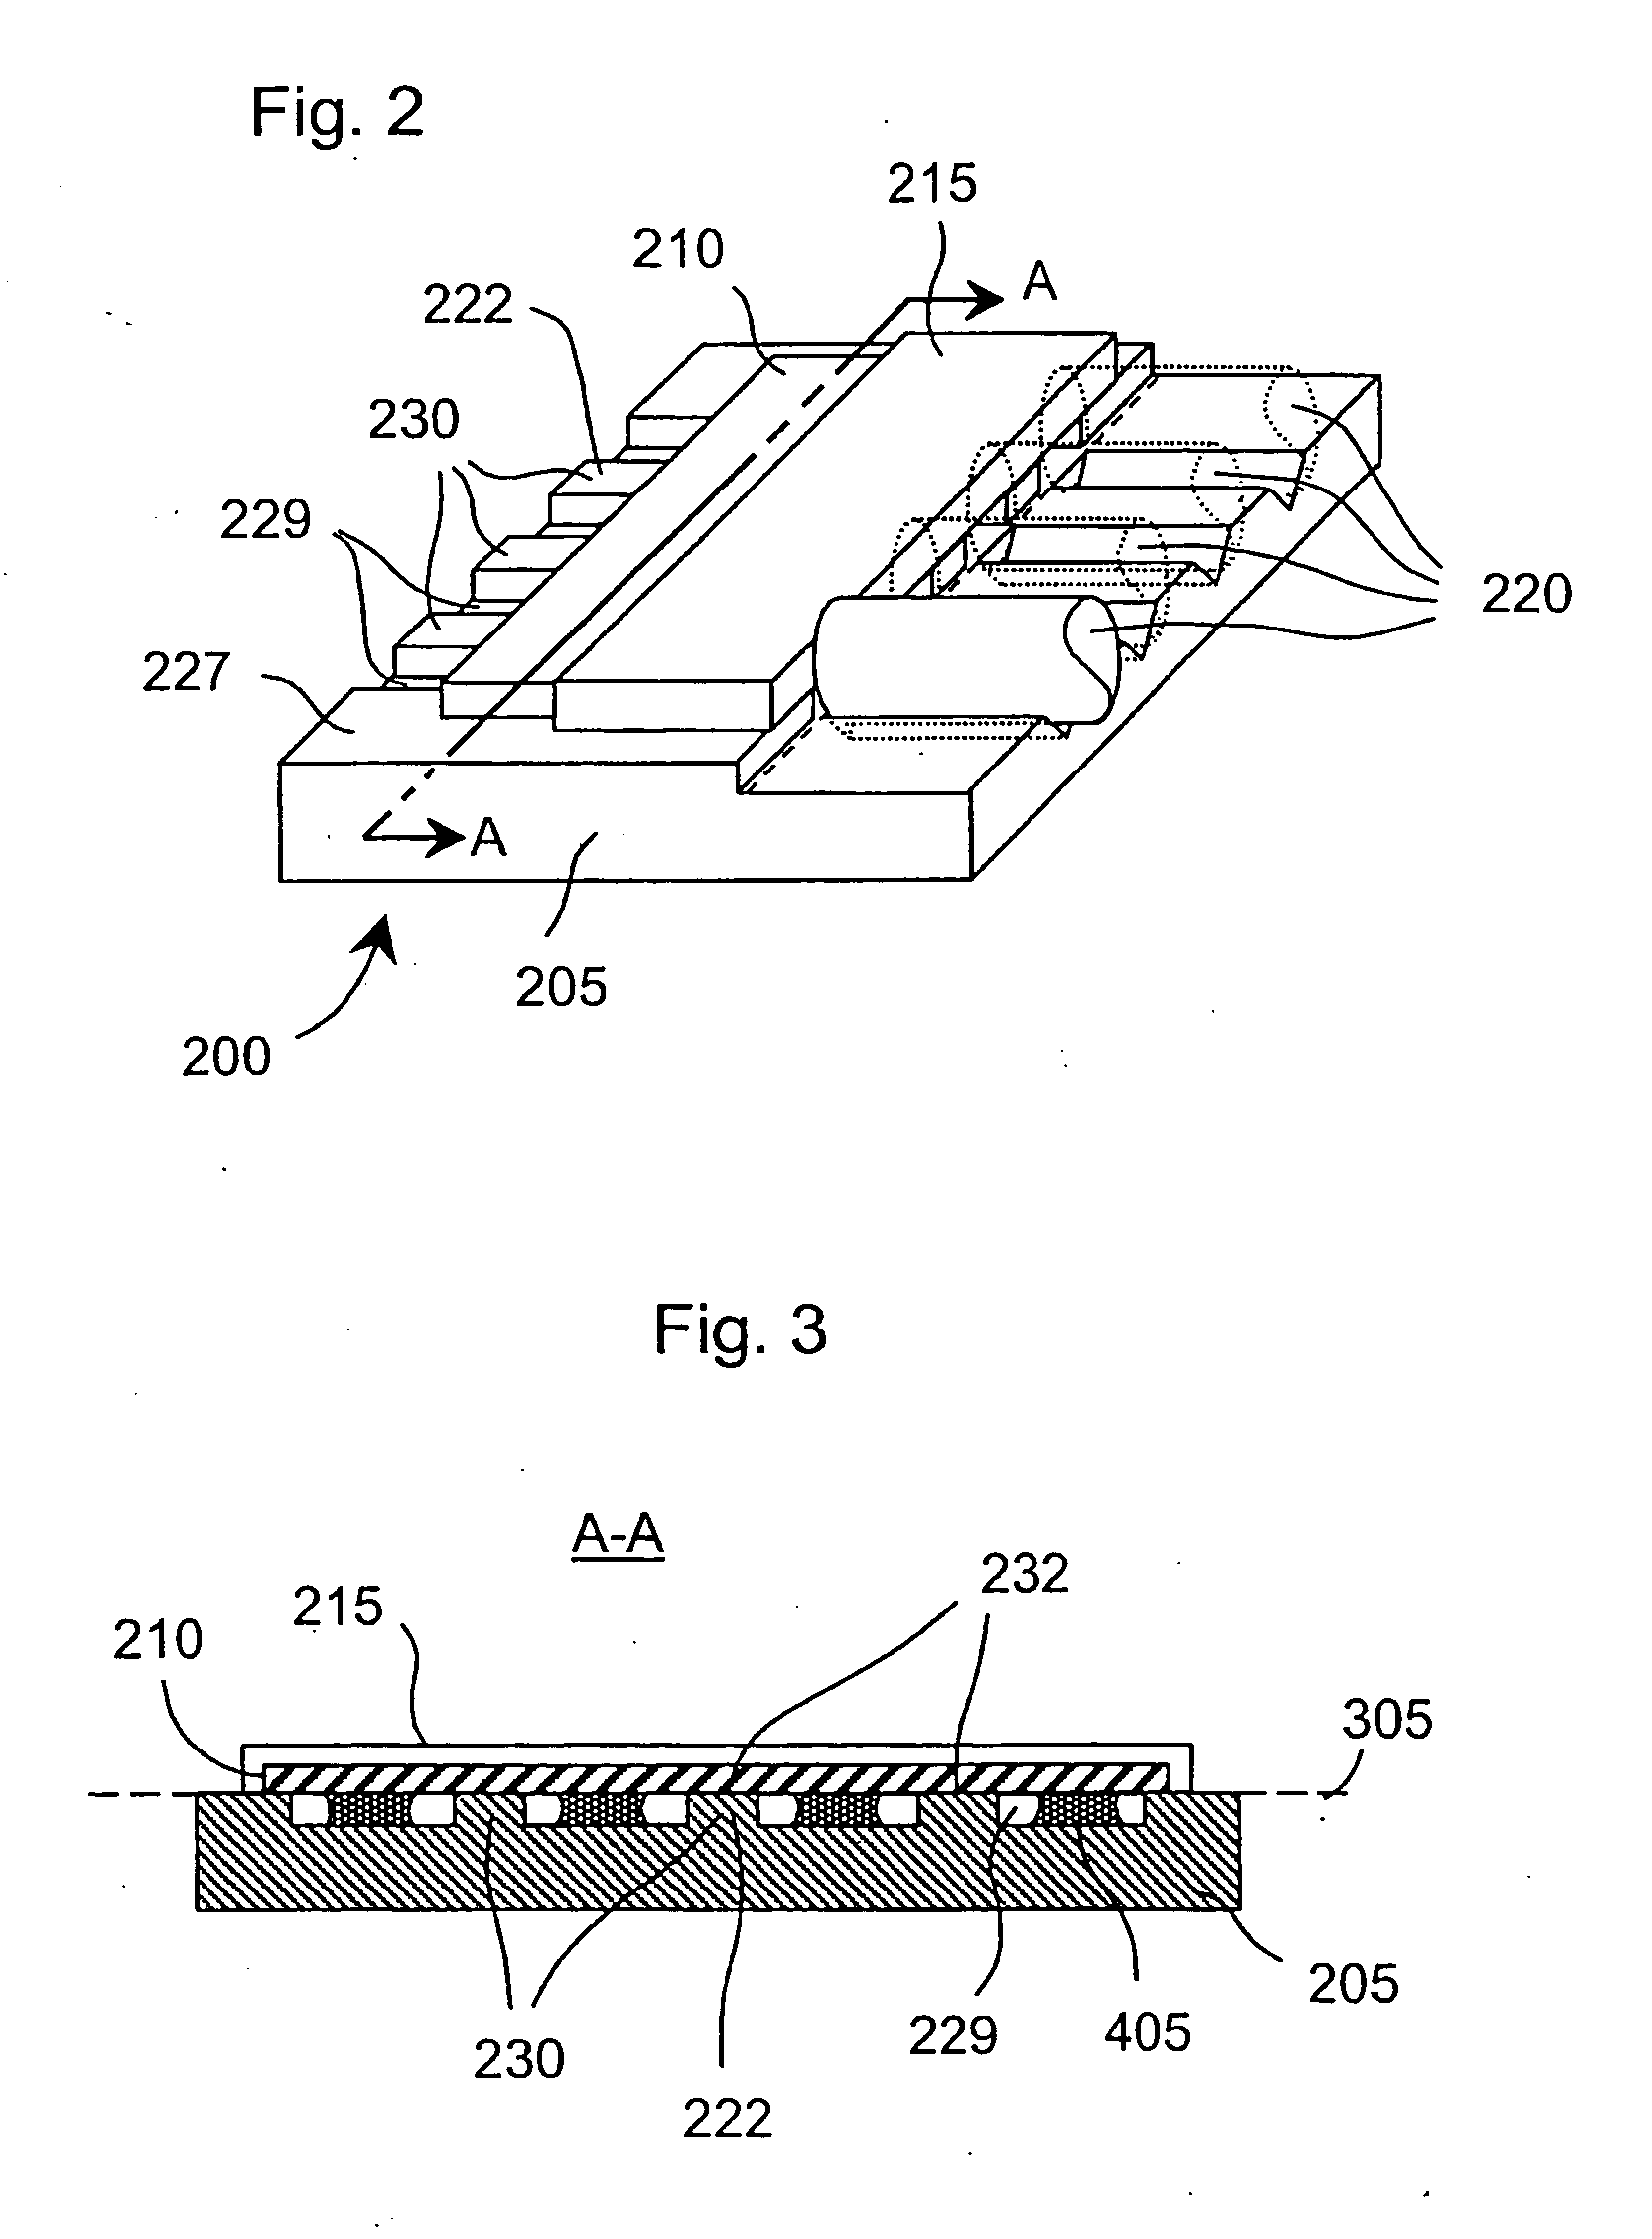 Multi-channel laser pump source for optical amplifiers